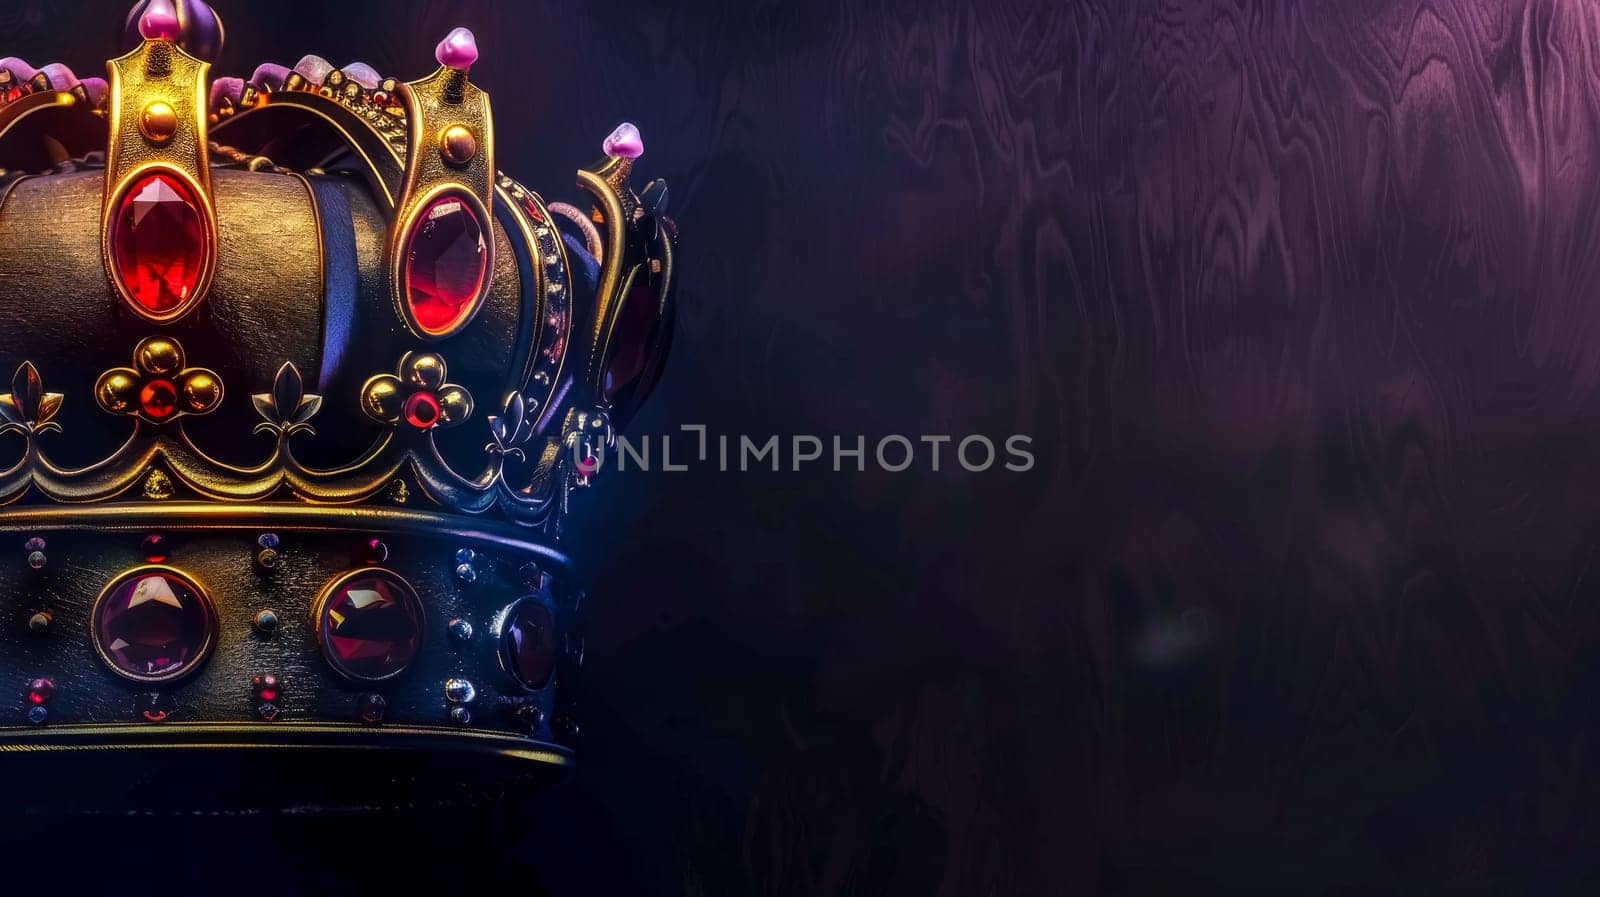 Regal crown adorned with gems against a moody, dark backdrop